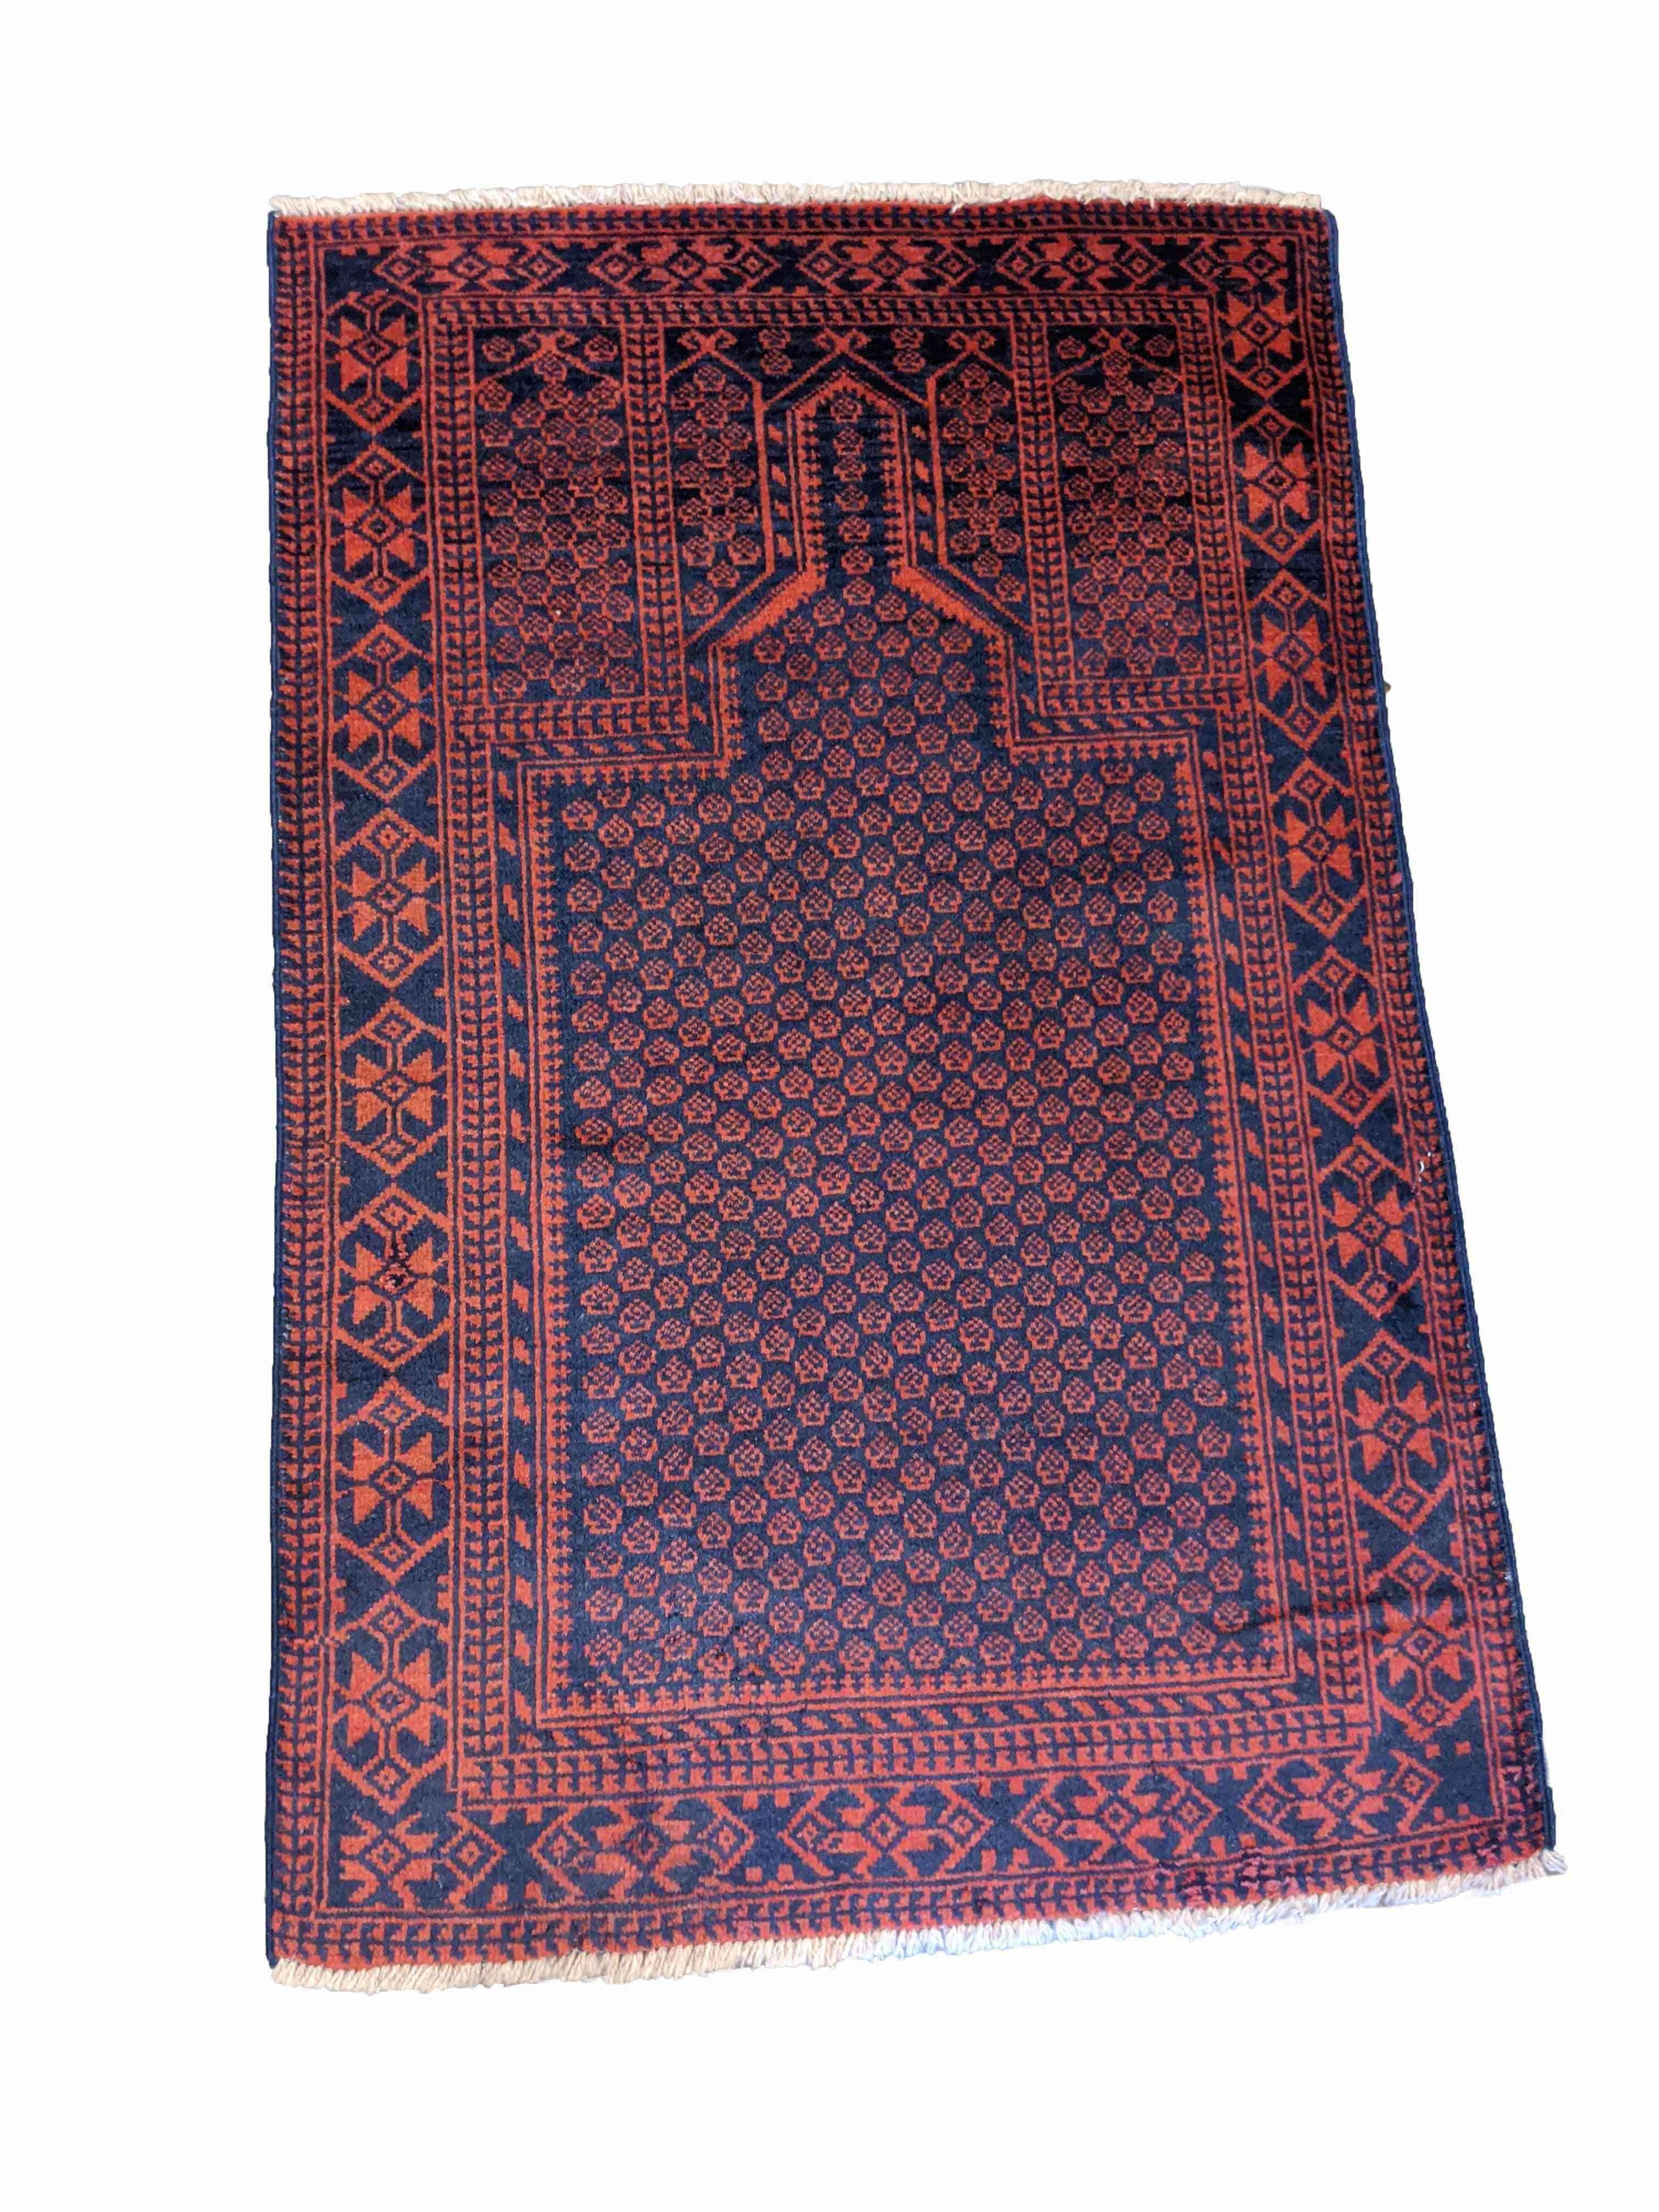 130 x 85 cm Persian Baluch Prayer Traditional Red Small Rug - Rugmaster